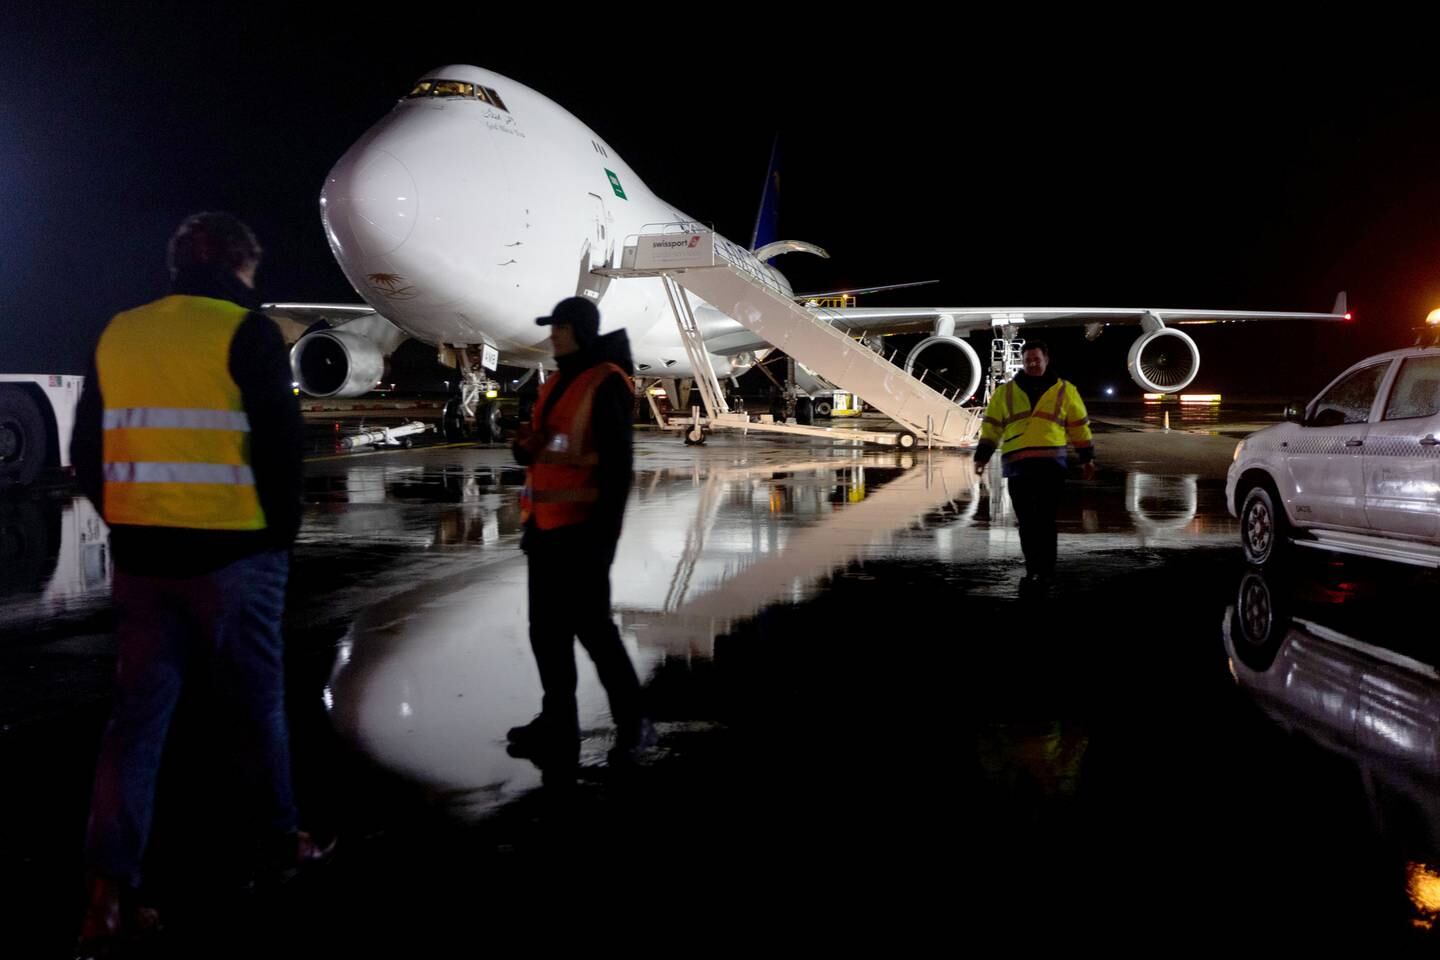 The Saudi Airlines plane on the tarmac at Stansted Aiport. Mark Chilvers / The National